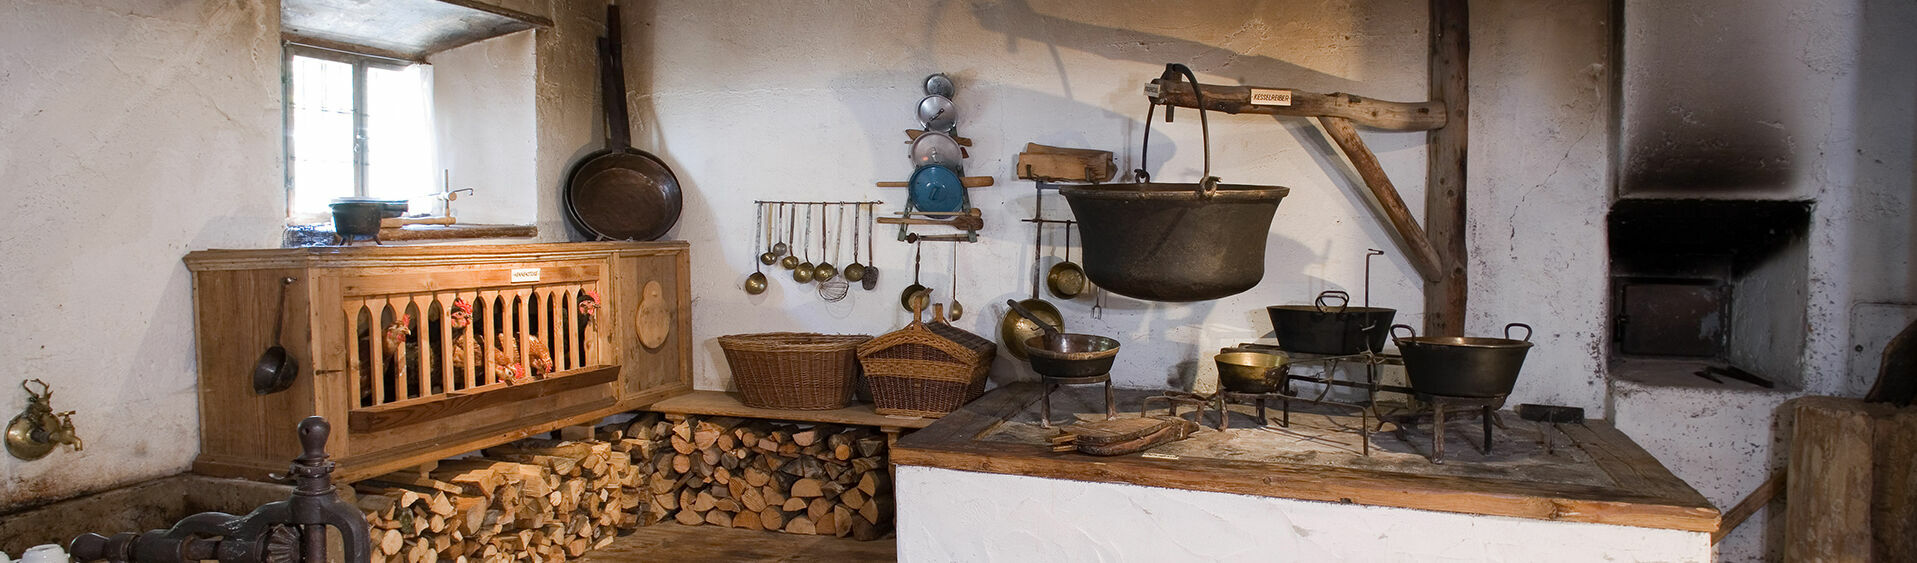 The old open-fire kitchen at the Achental museum of local history in Achenkirch am Achensee.